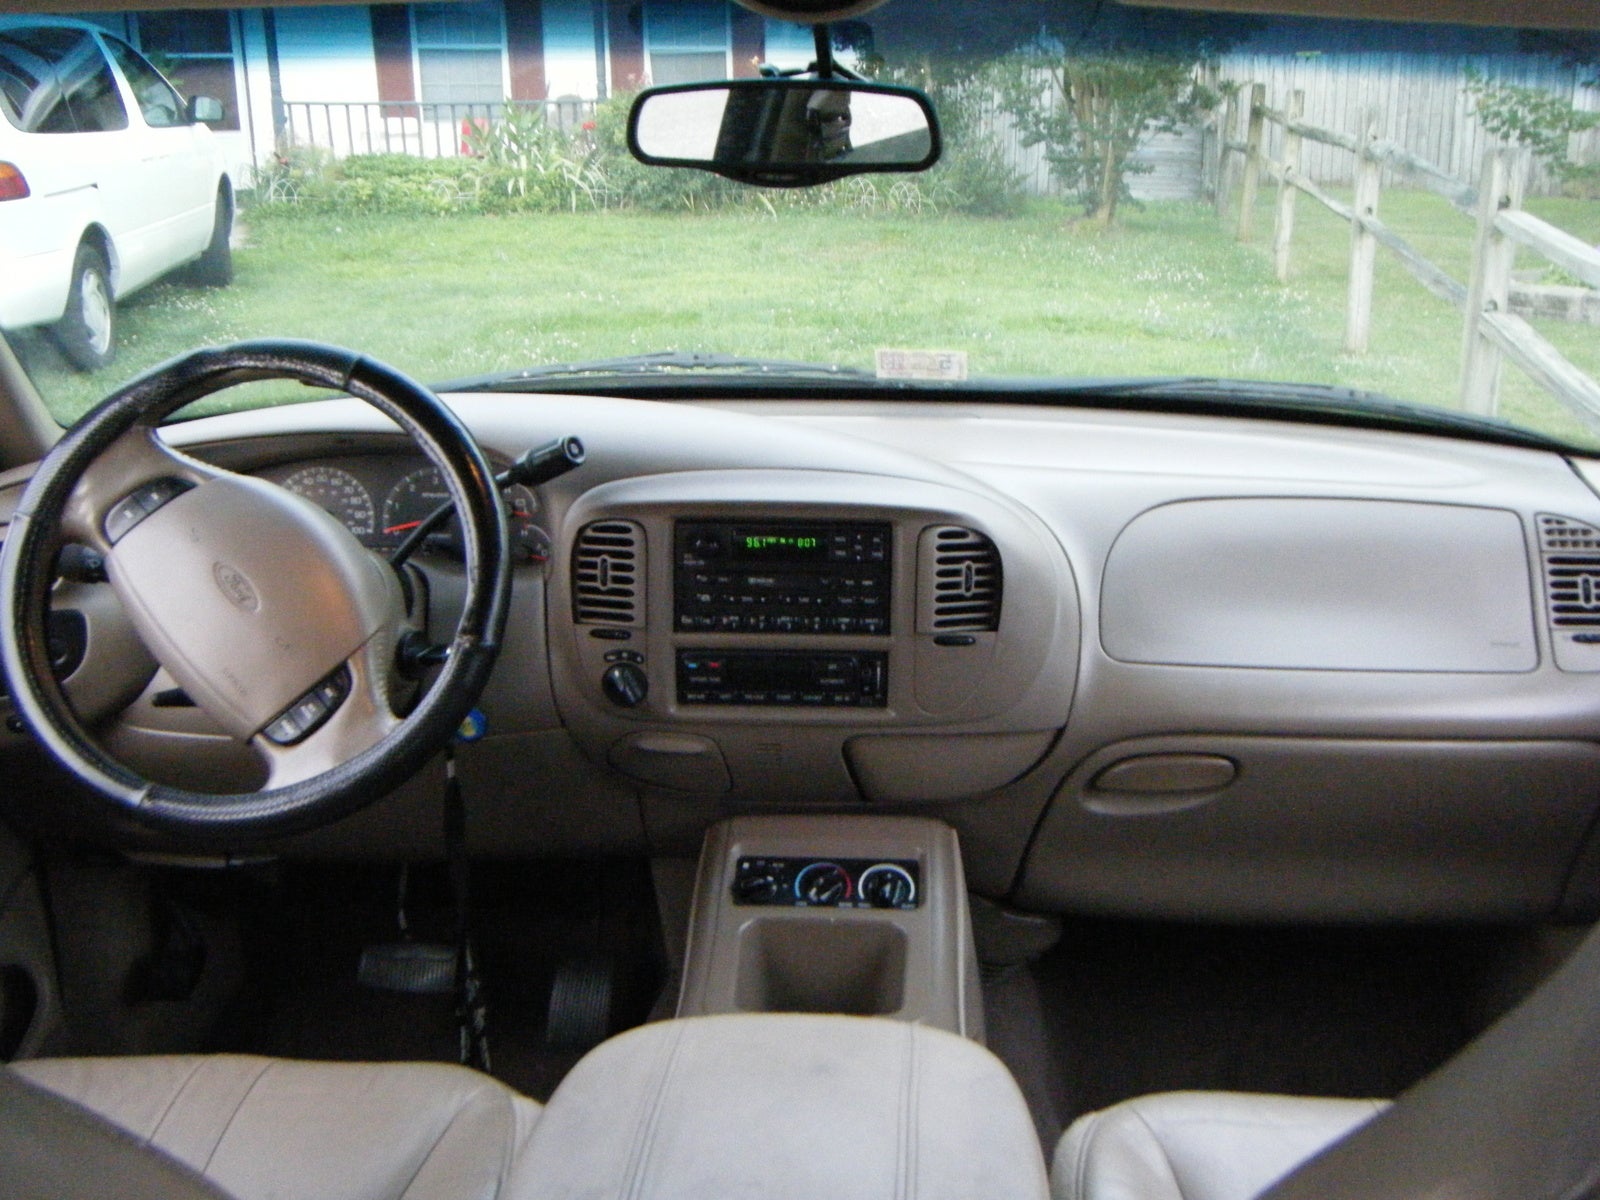 2000 Ford expedition interior #3